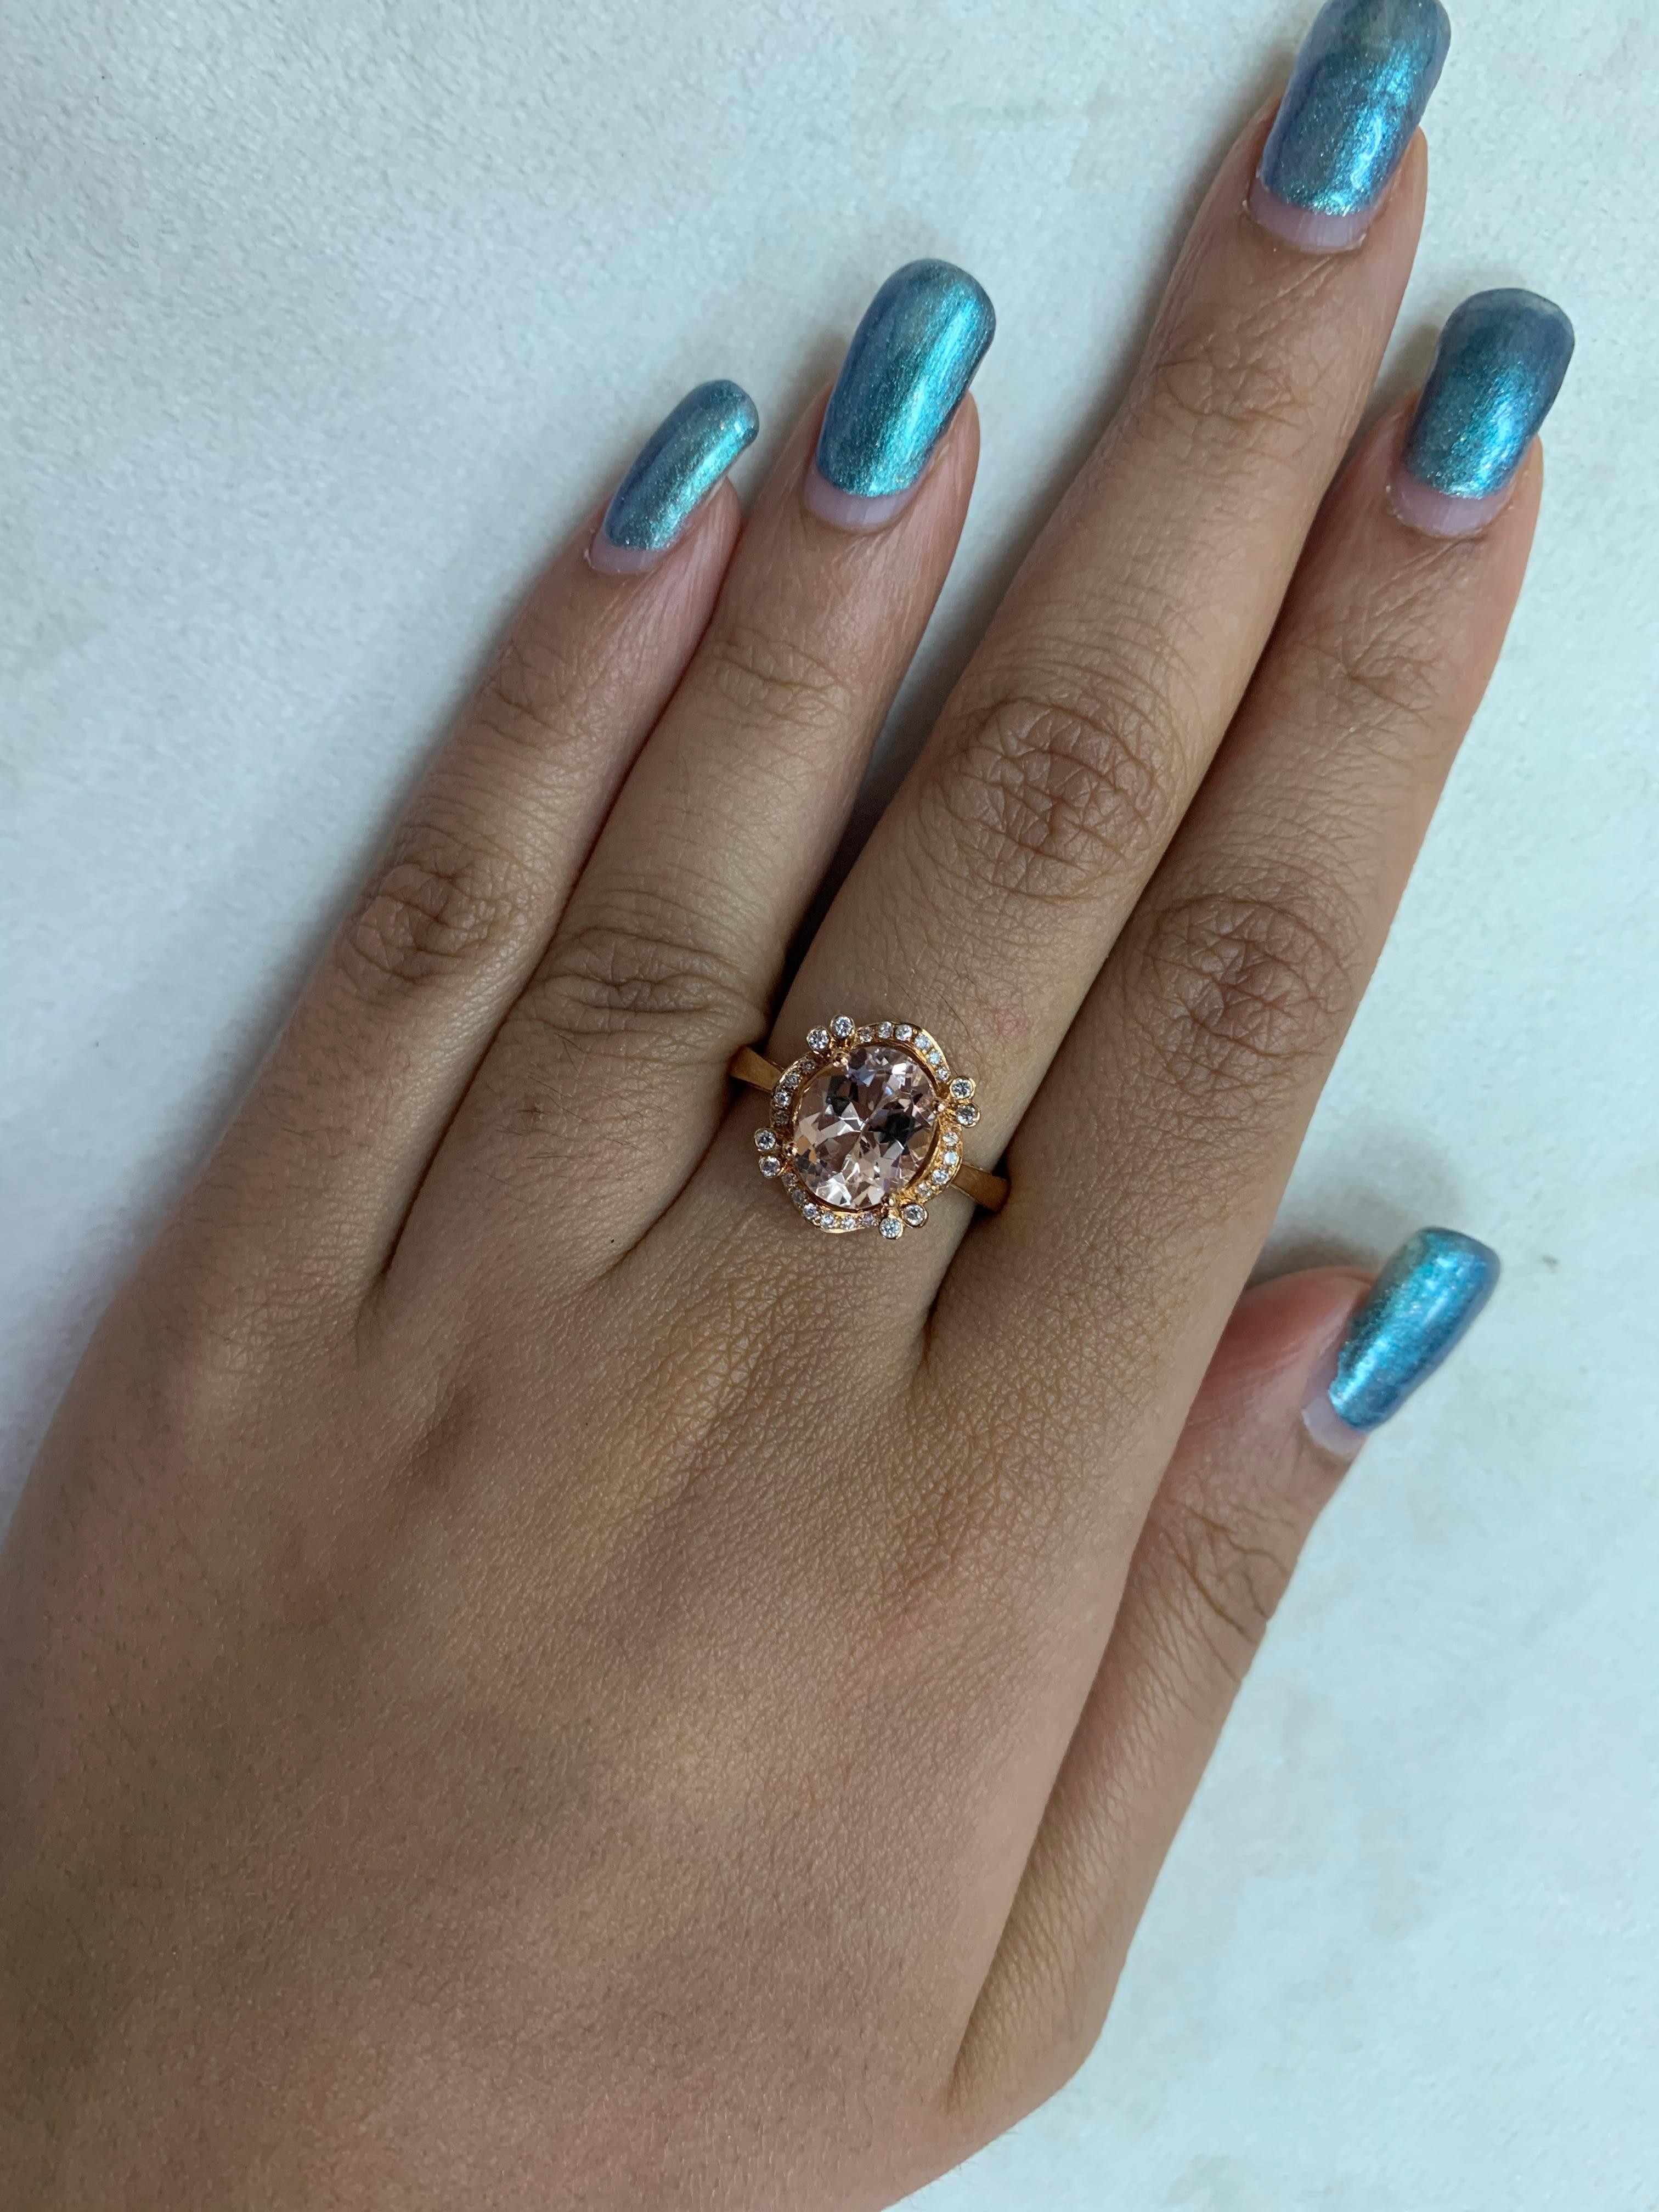 This collection features an array of magnificent morganites! Accented with diamonds these rings are made in rose gold and present a classic yet elegant look. 

Classic morganite ring in 18K rose gold with diamonds. 

Morganite: 2.21 carat oval